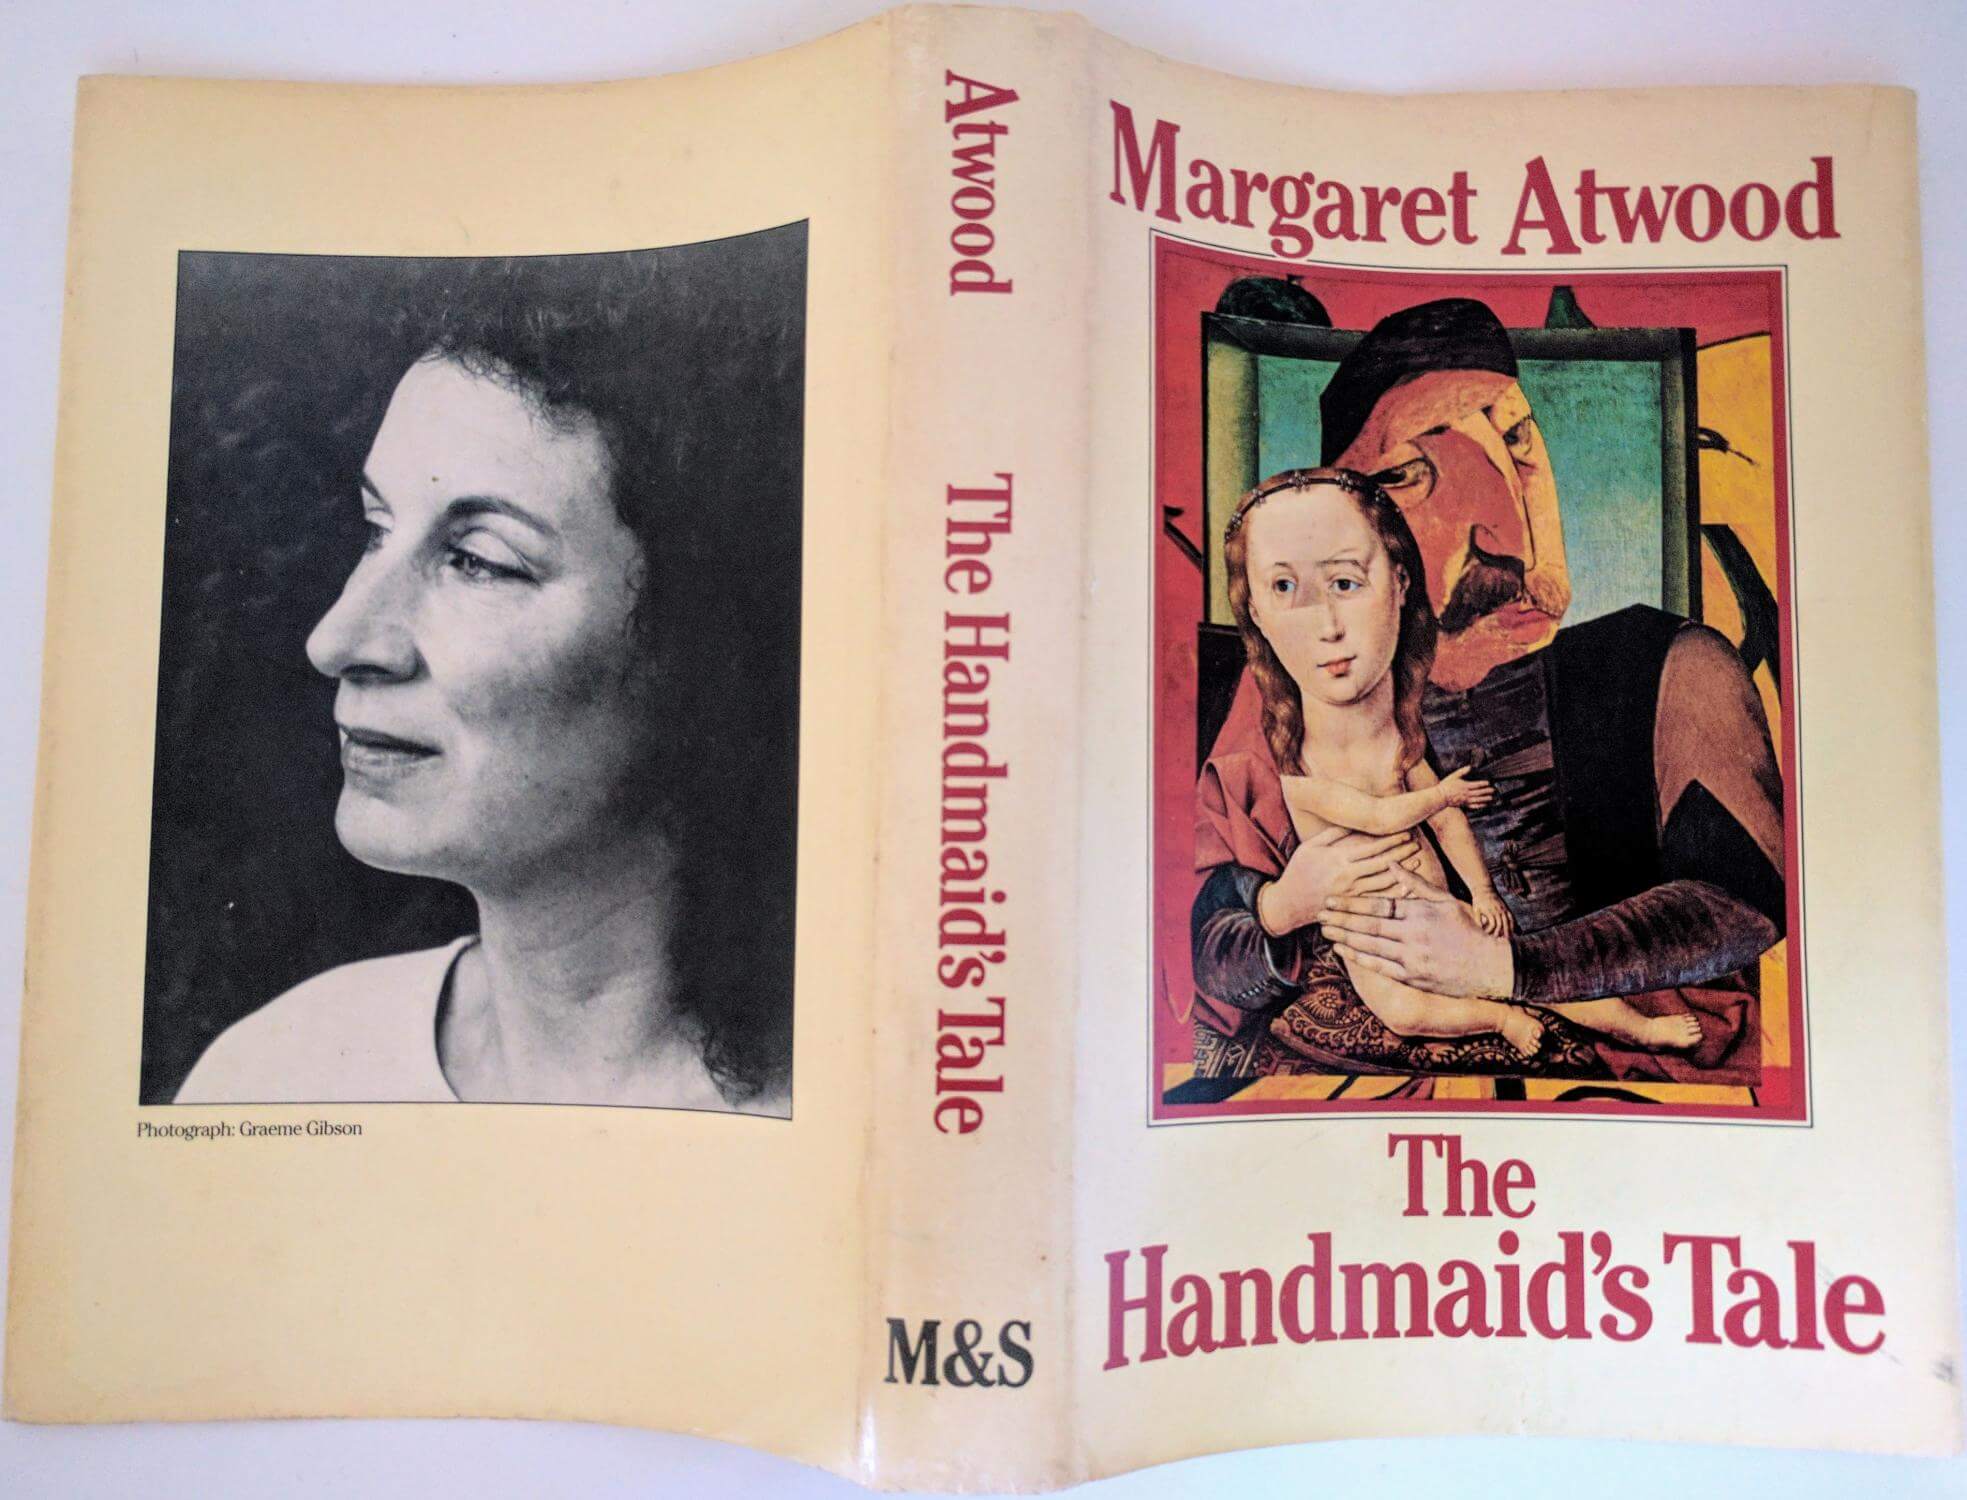 First edition of the novel released in 1985